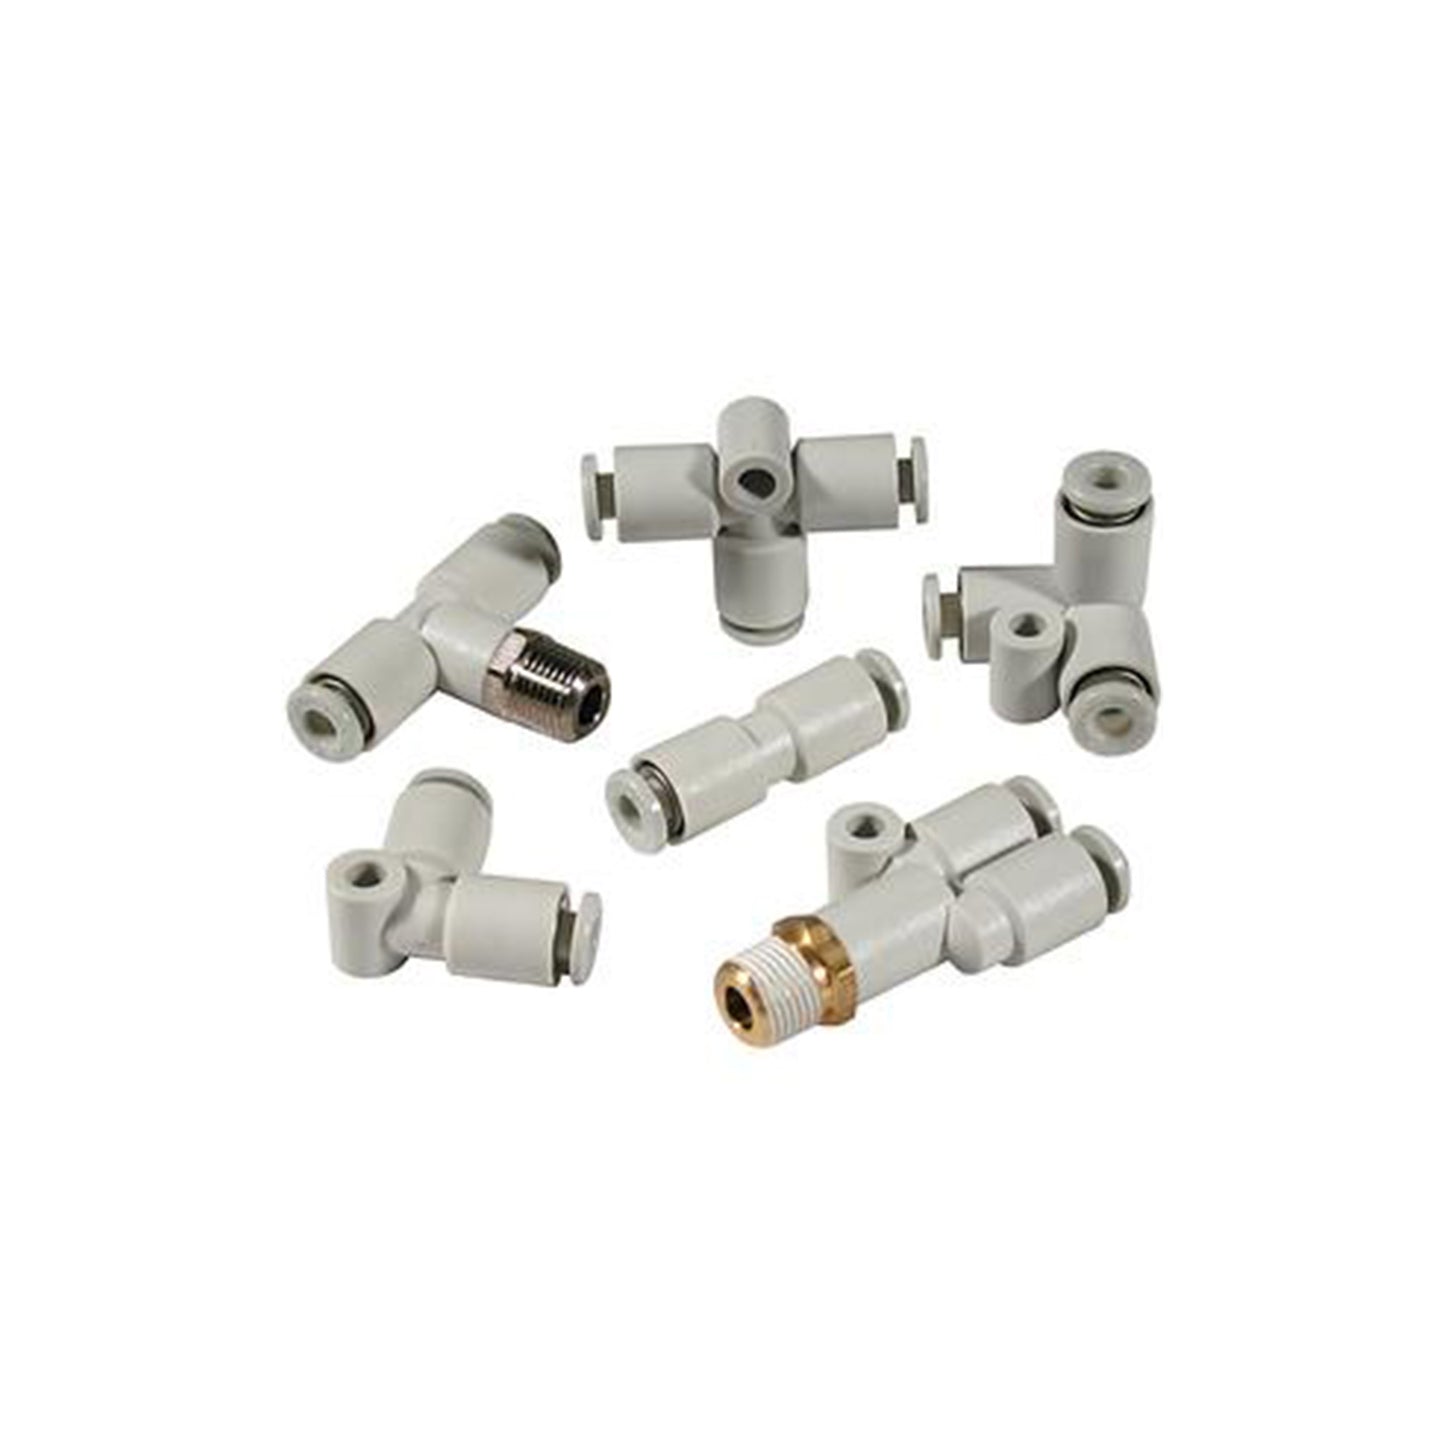 SMC KQ2H13-U04 | Unifit Male Connector Fitting